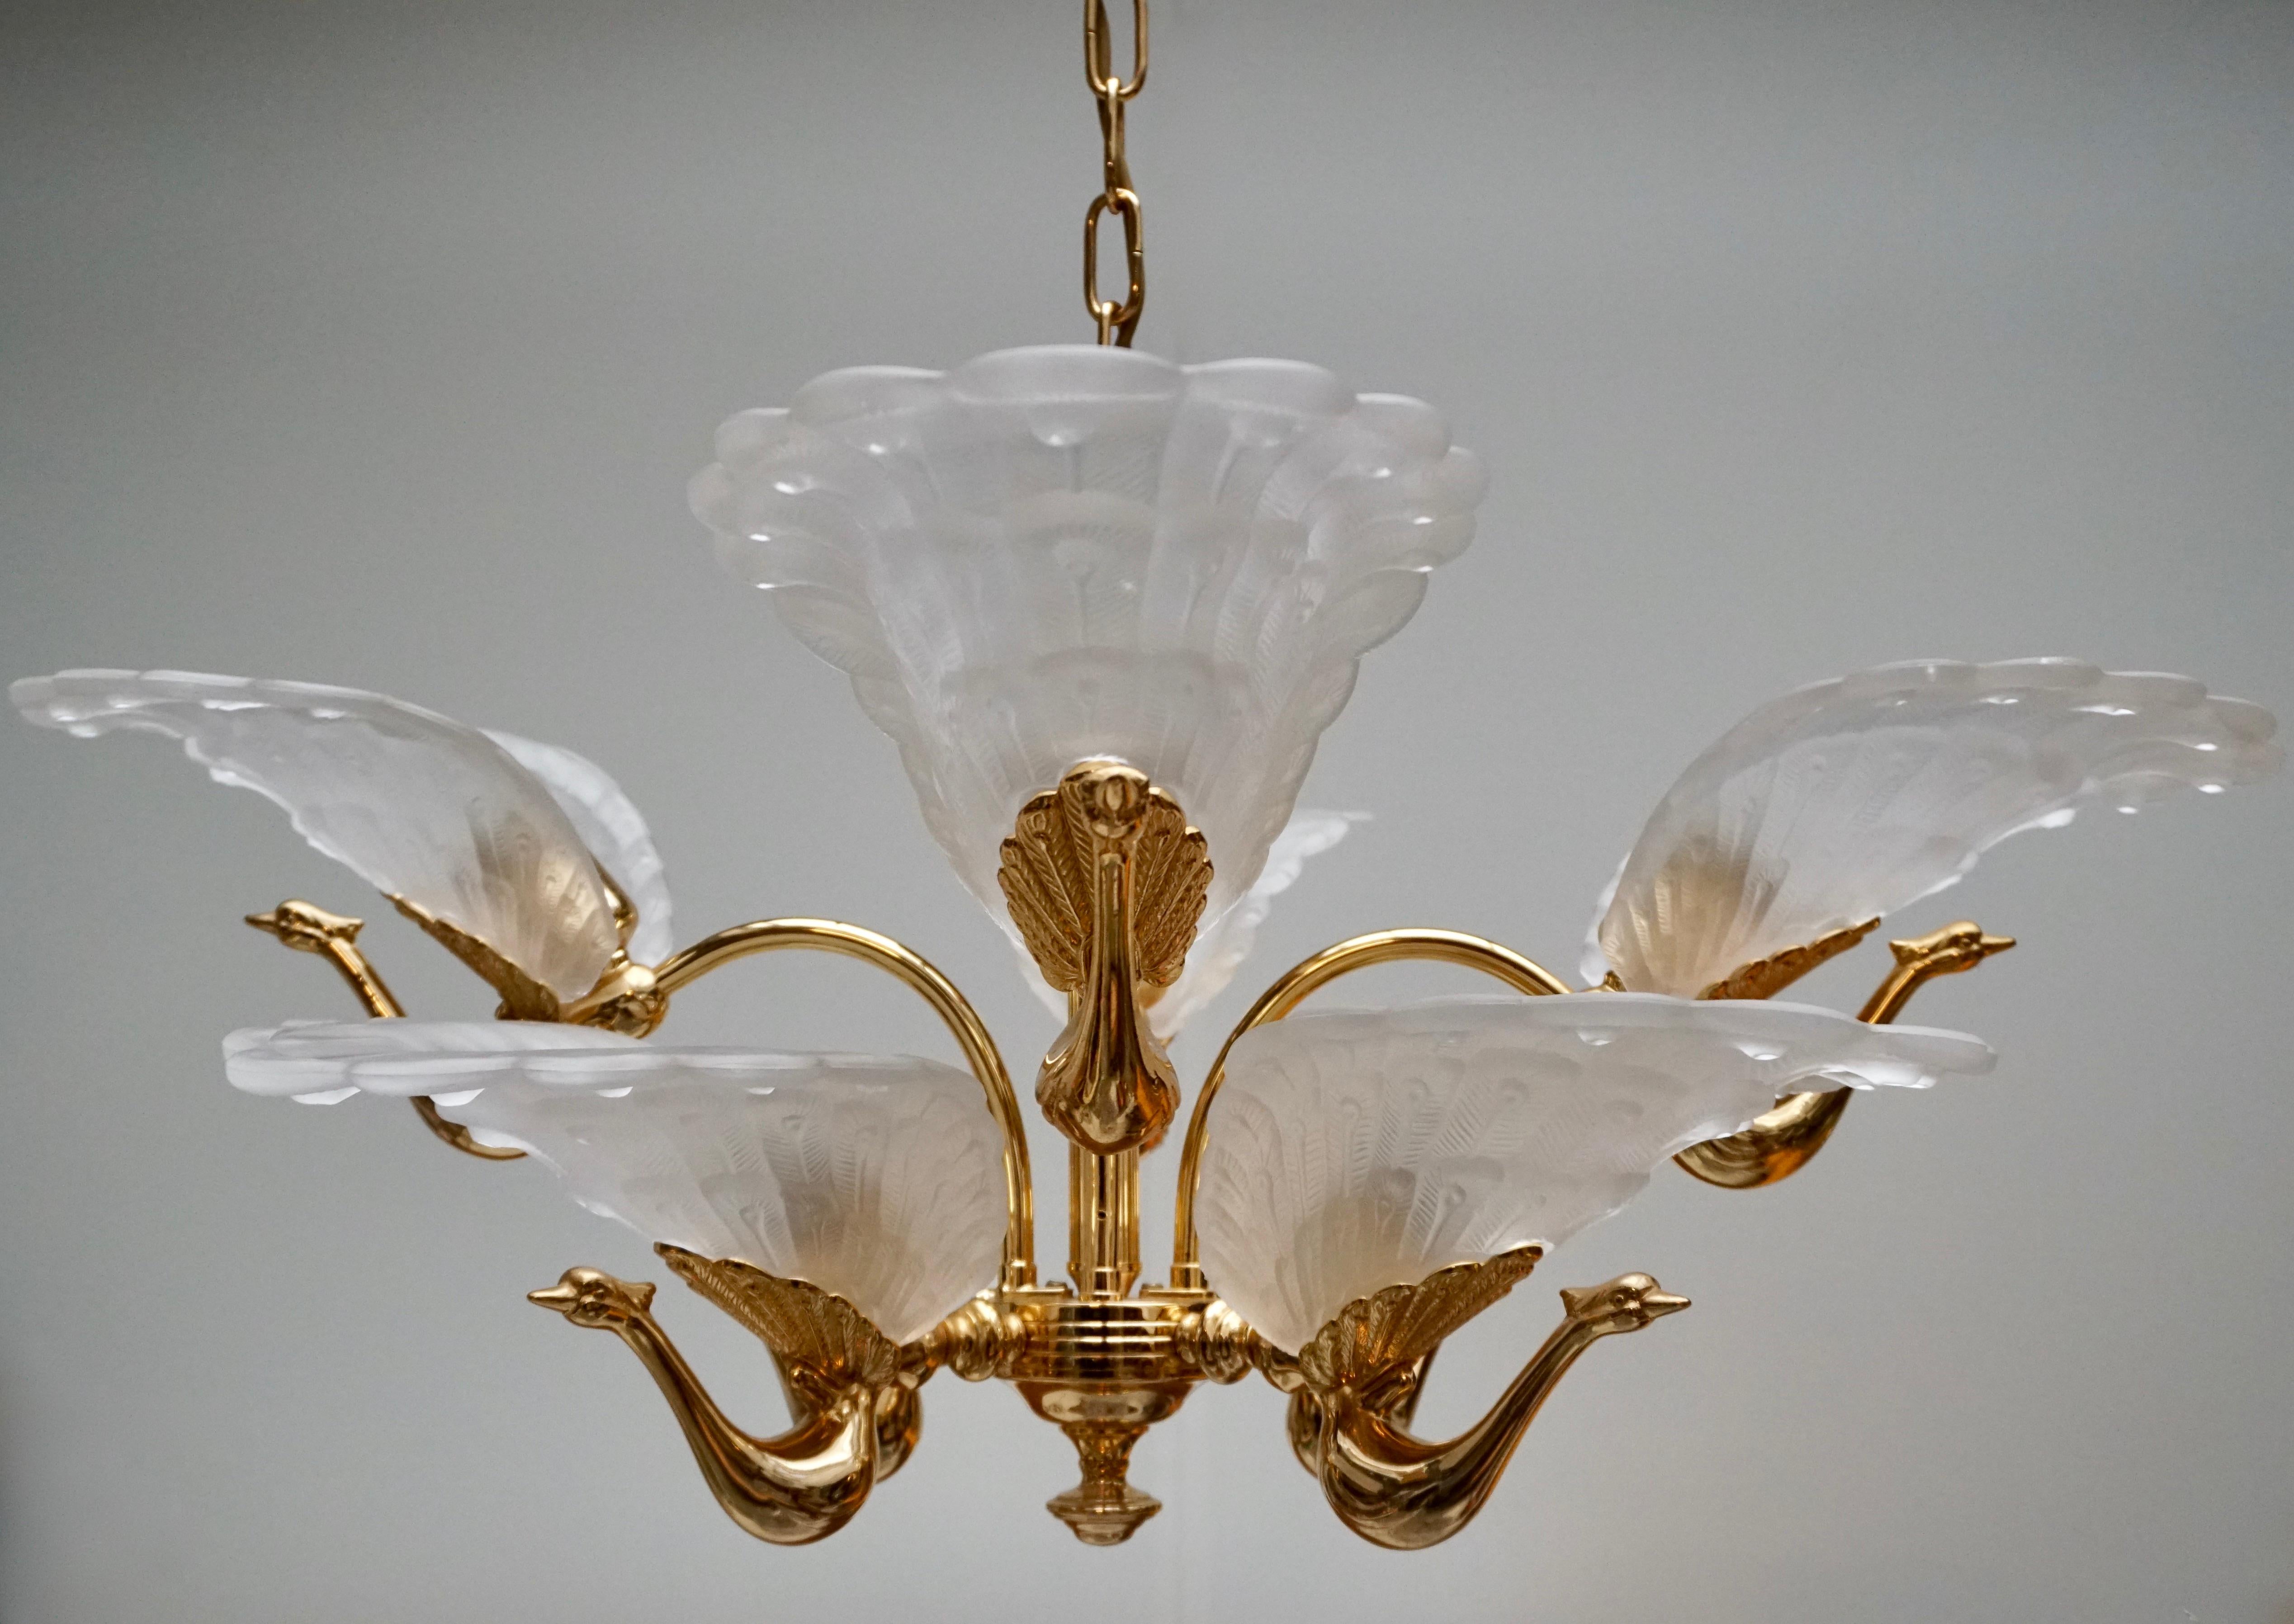 A eight light chandelier with eight etched or frosted glass shades, each embossed with a peacock motif. The cast metal bird's bodies and sculptured center column are heavy weight cast metal with an original lacquered brass finish. Sculptural and